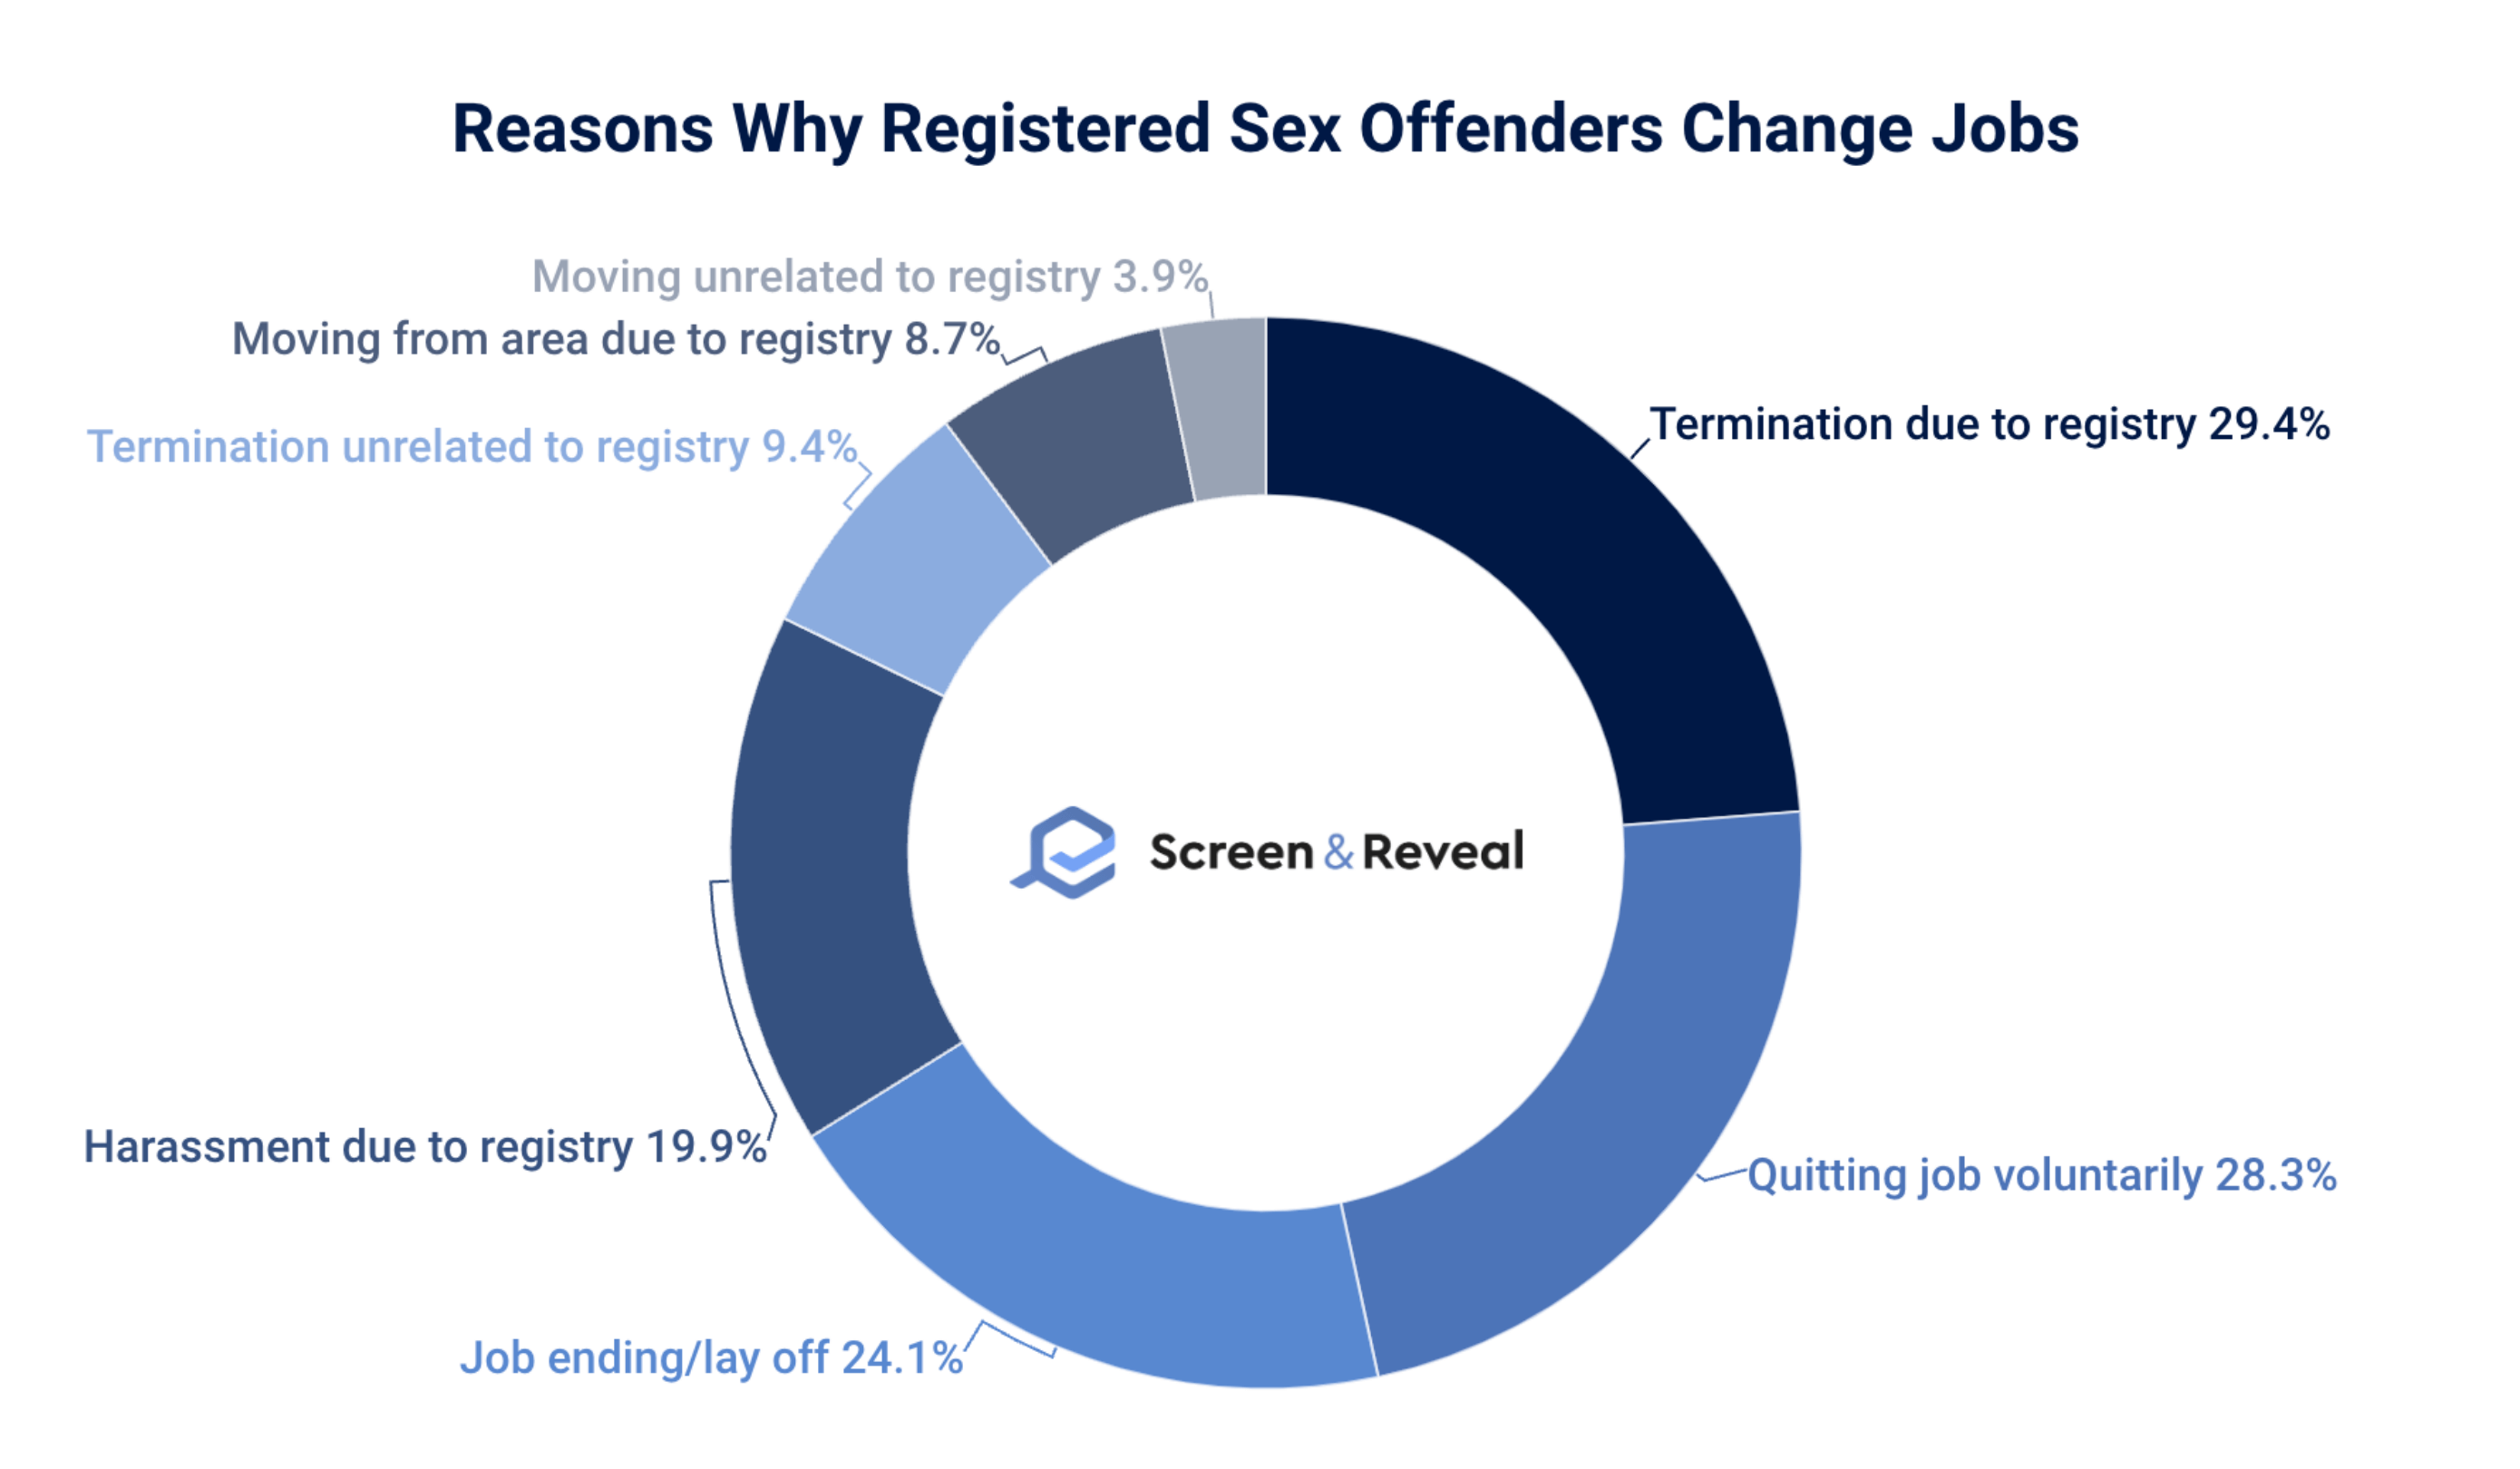 Reasons Why Registered Sex Offenders Change Jobs